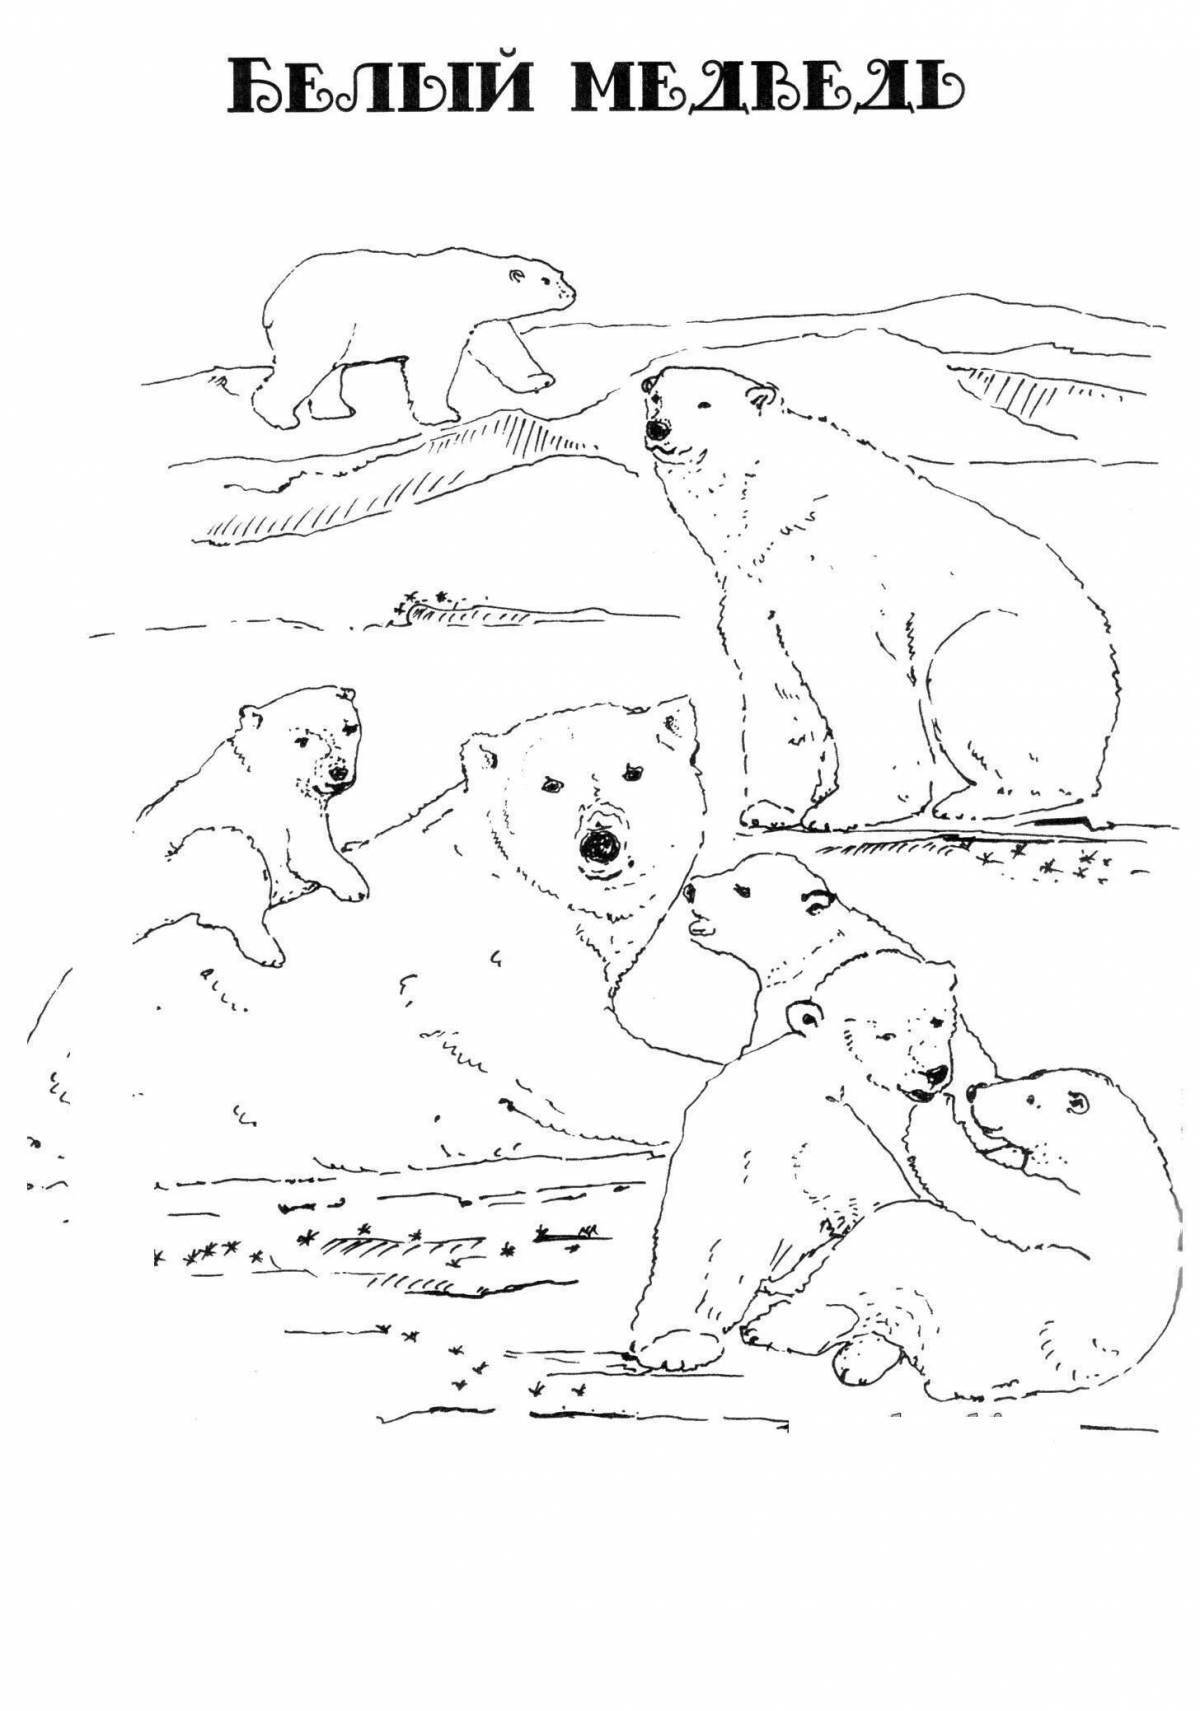 Adorable bear cub in northern coloring book